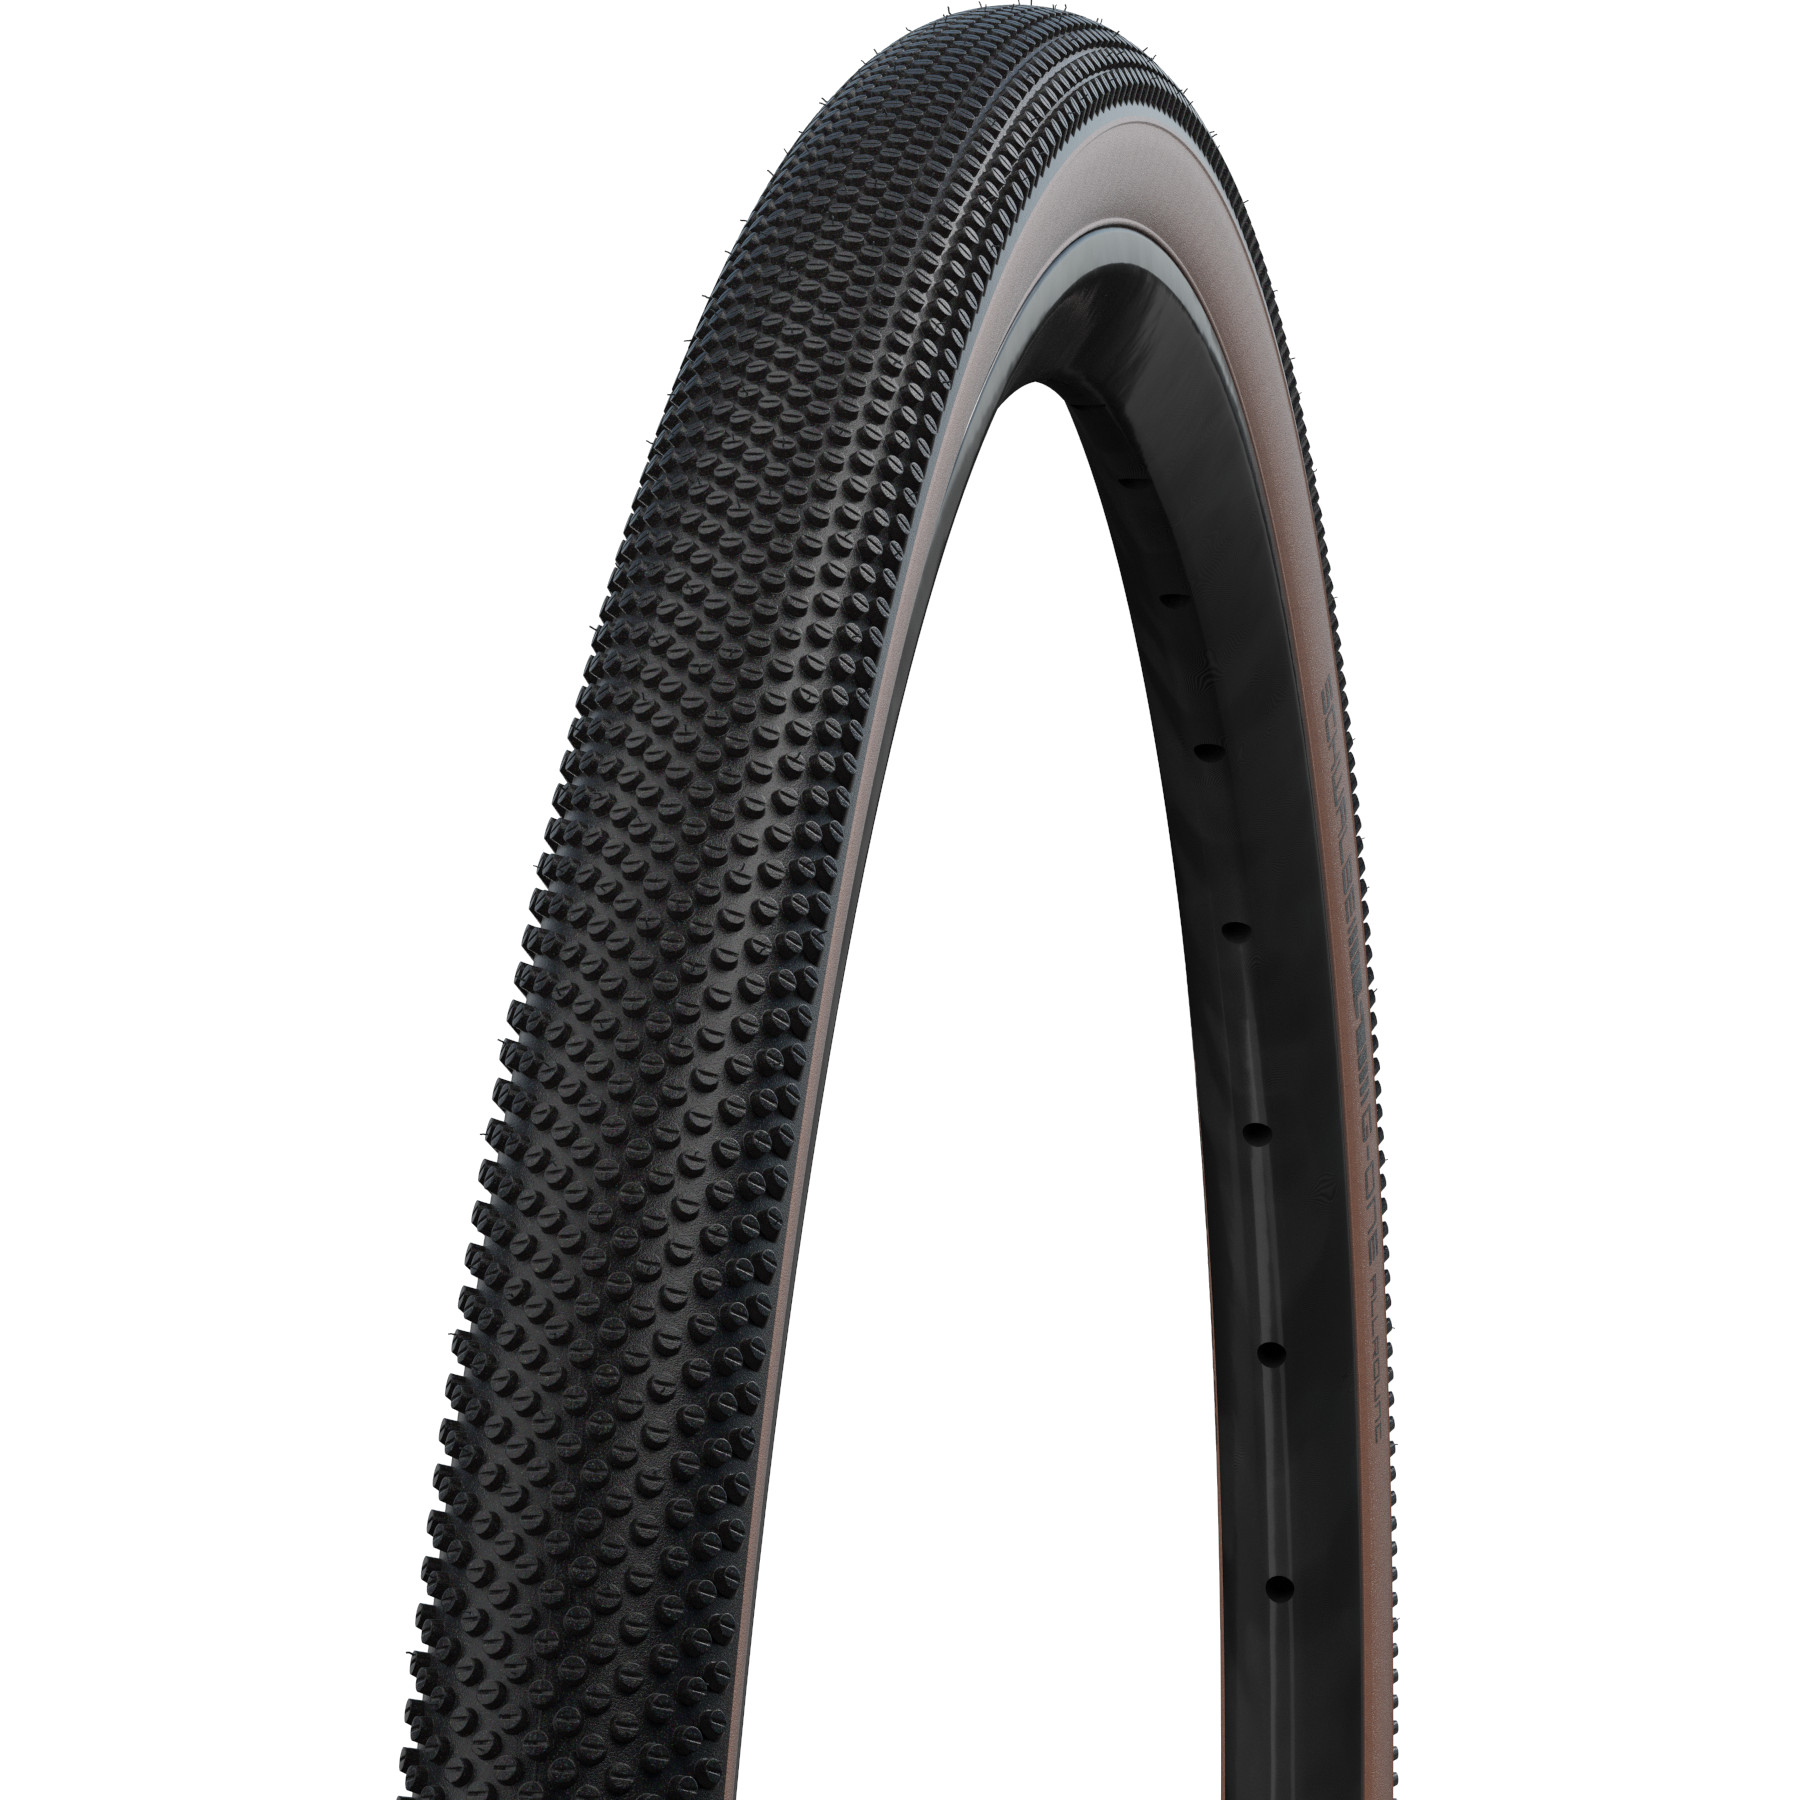 Picture of Schwalbe G-ONE Allround Folding Tire - Gravel | Performance | Addix | Race Guard | TLEasy - E-25 - 35-622 | Bronze Sidewall